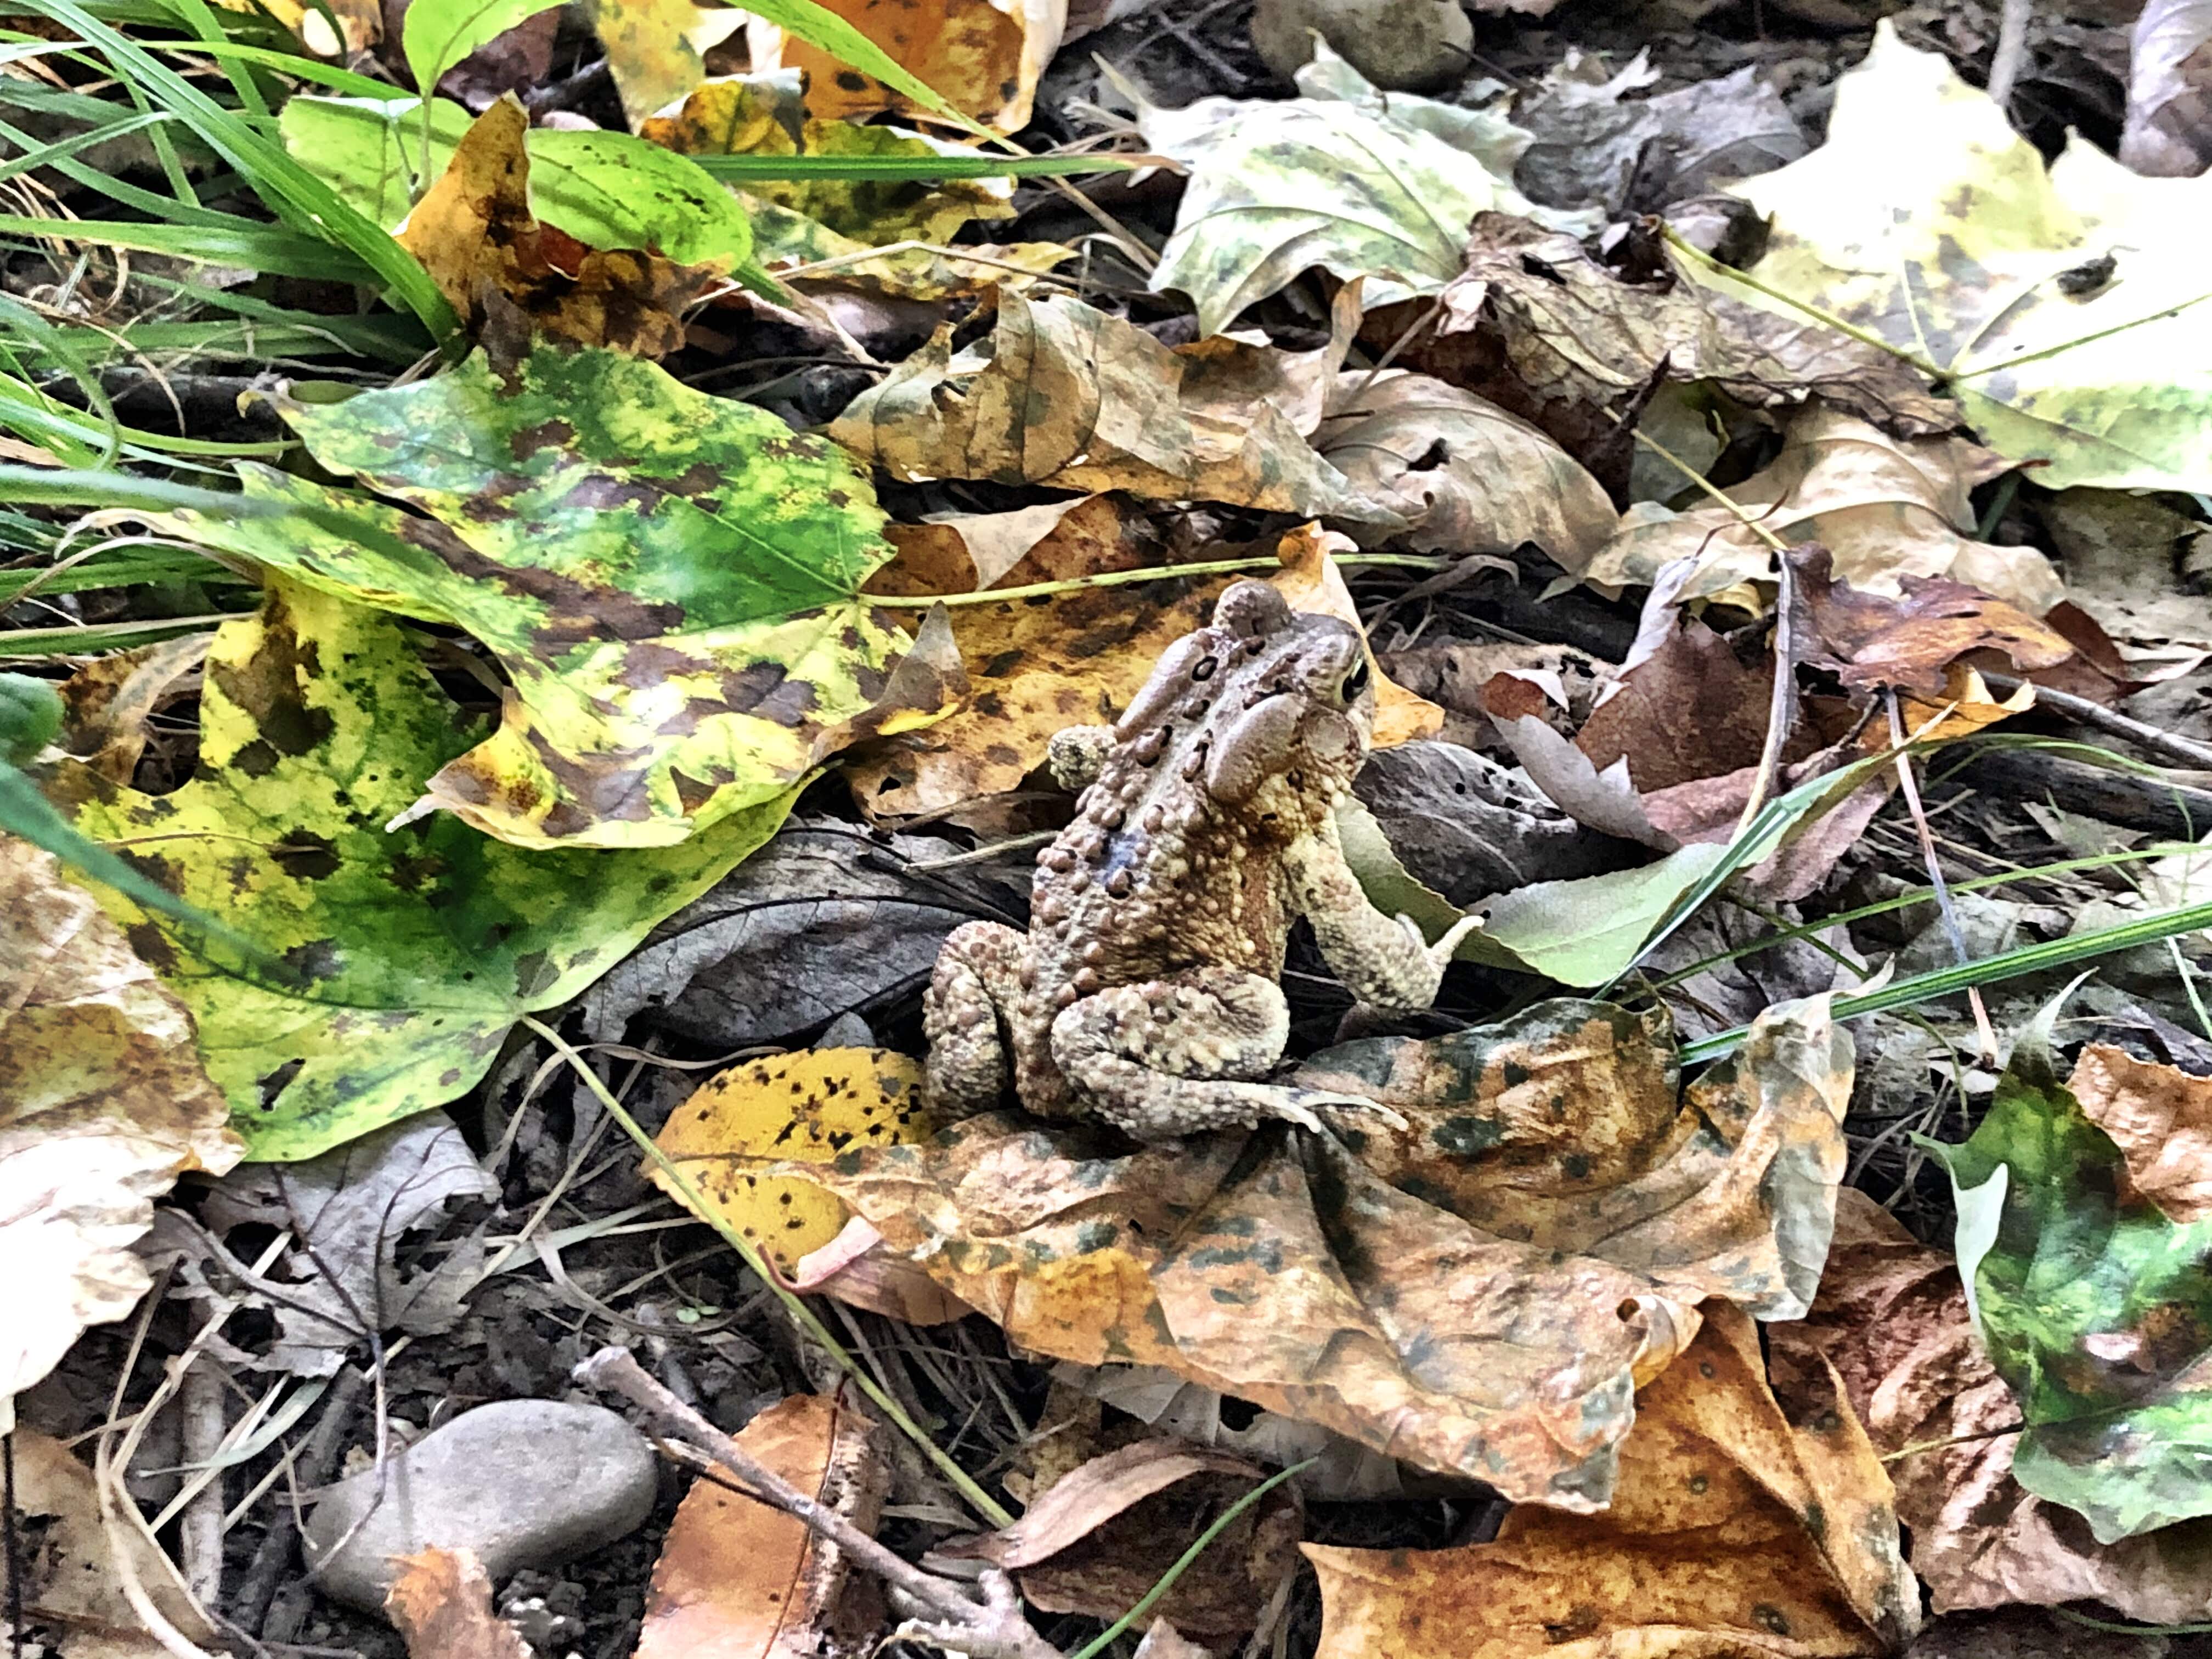 Camouflaged frog in Cuyahoga Valley National Park